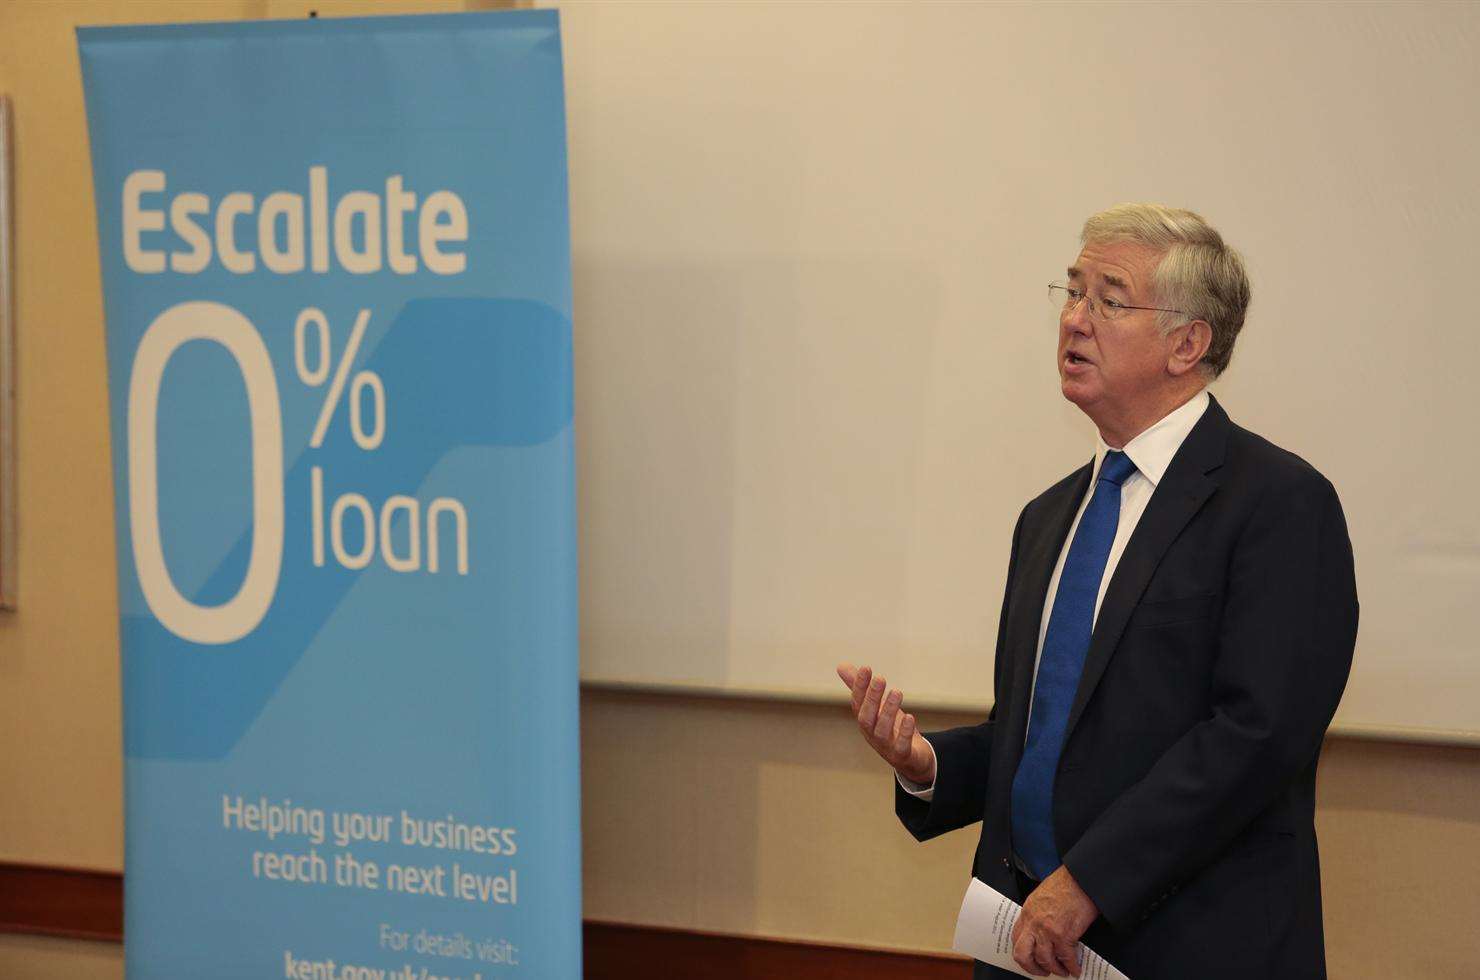 Michael Fallon discussed the Escalate scheme which provides interest free loans and funding